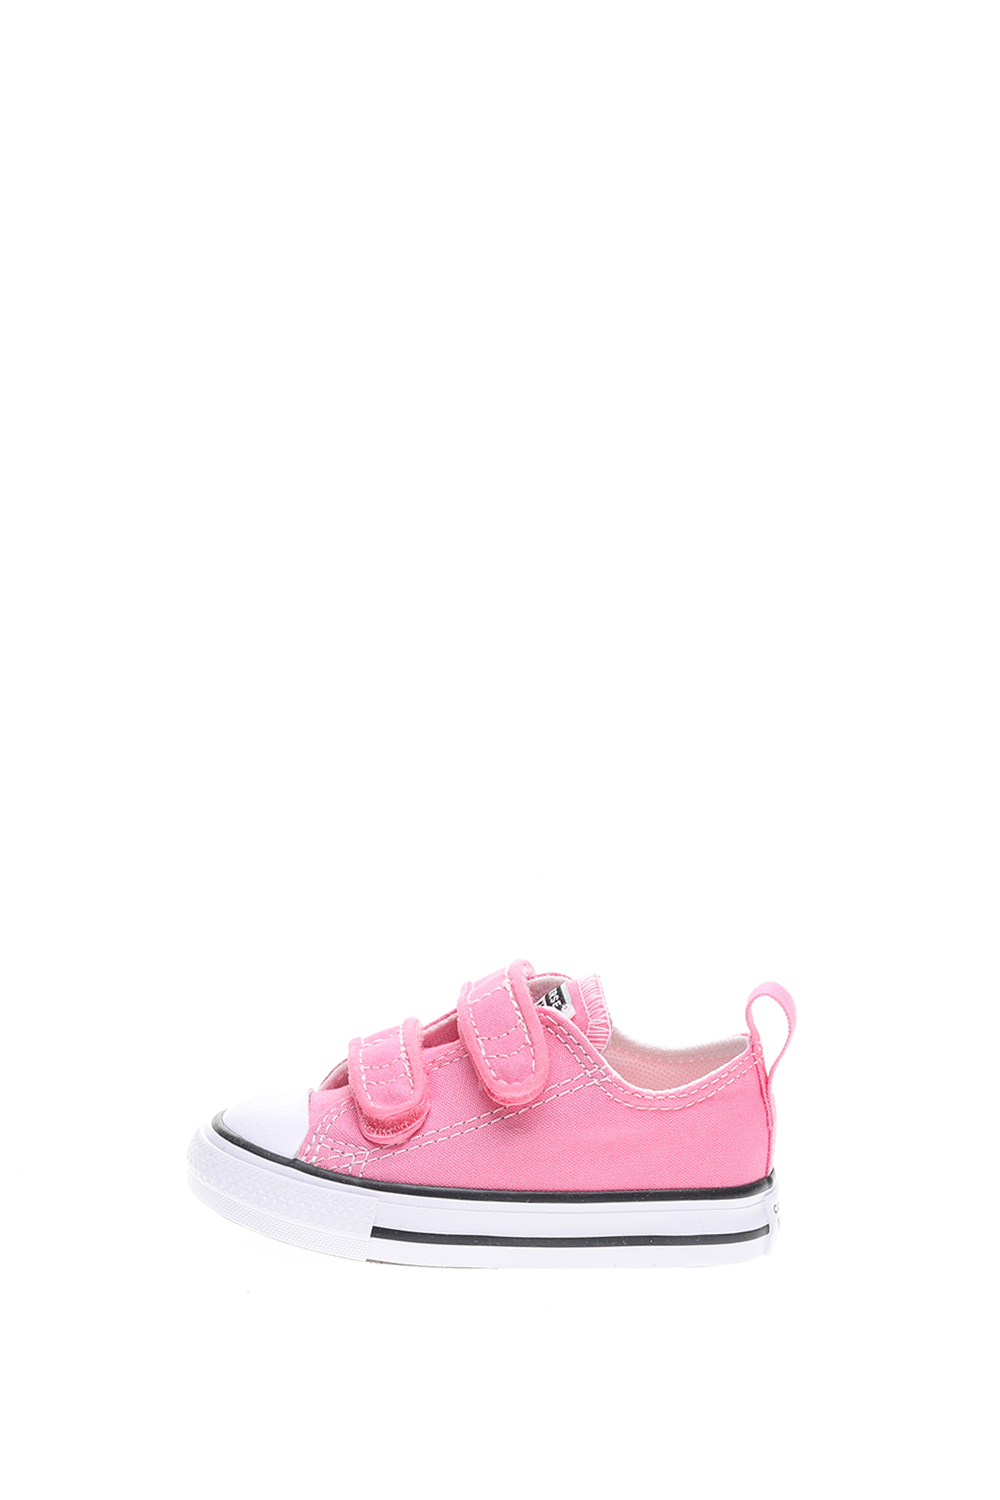 CONVERSE – Βρεφικα sneakers CONVERSE Chuck Taylor All Star 2V ροζ